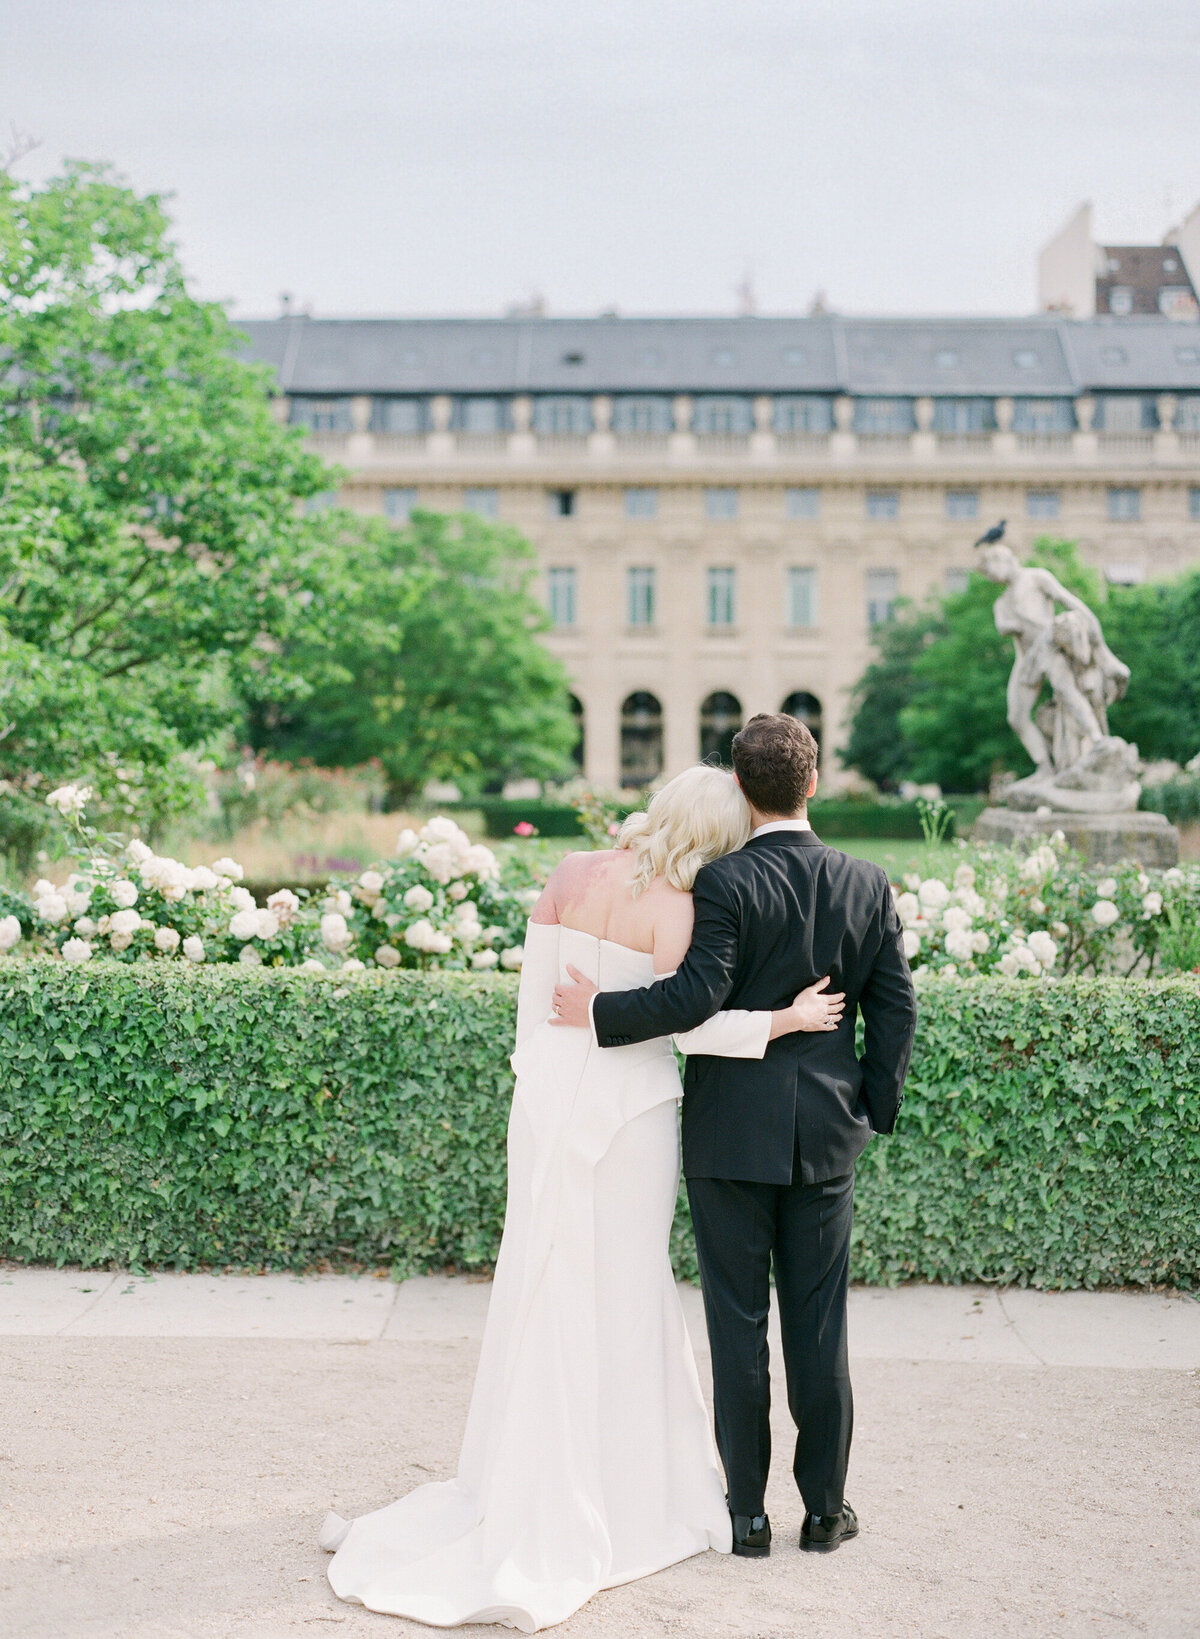 Jennifer Fox Weddings English speaking wedding planning & design agency in France crafting refined and bespoke weddings and celebrations Provence, Paris and destination Laurel-Chris-Chateau-de-Champlatreaux-Molly-Carr-Photography-10